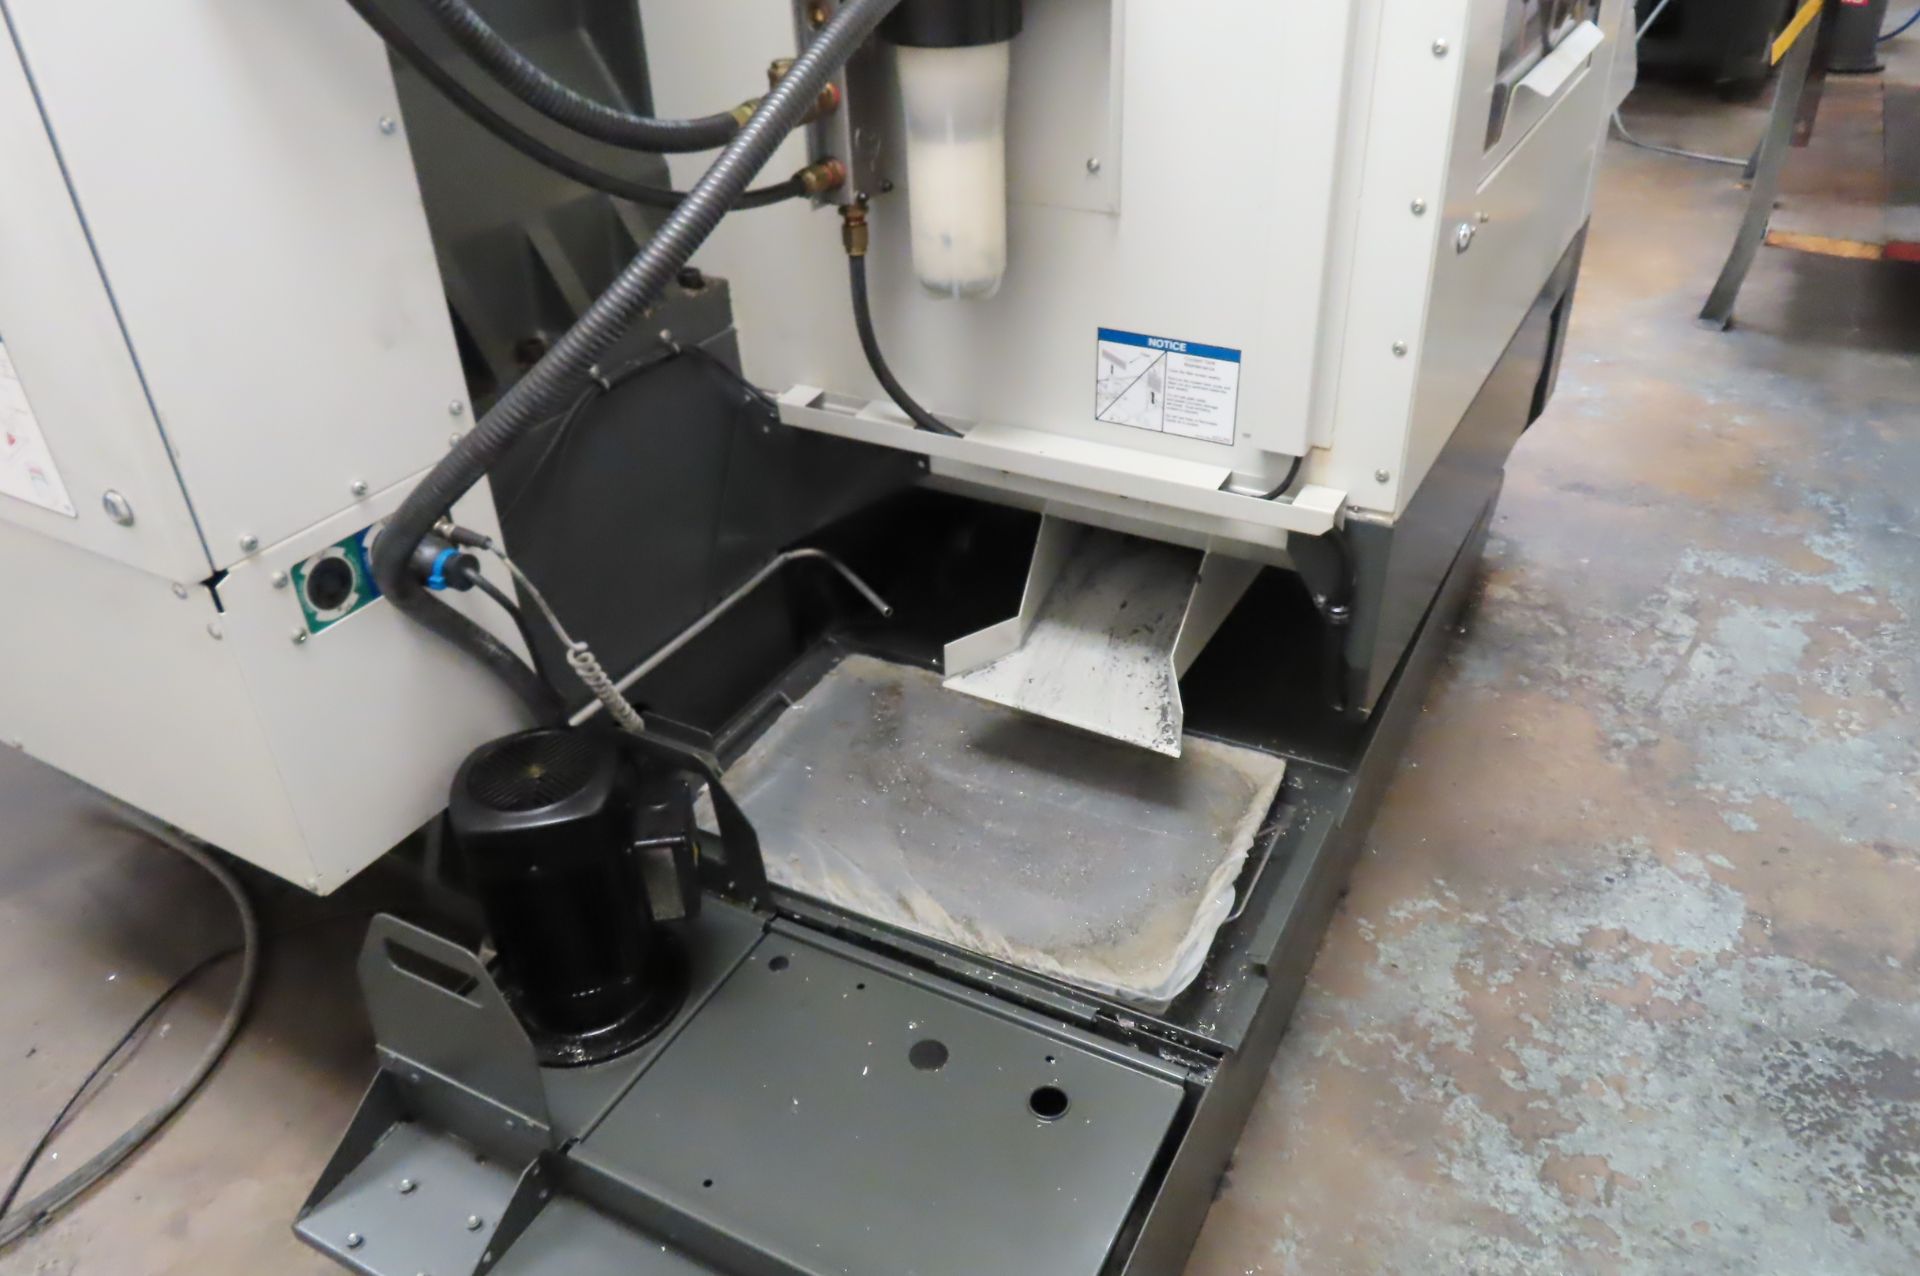 2014 HAAS VF-1 CNC VERTICAL MACHINING CENTER - Image 8 of 12